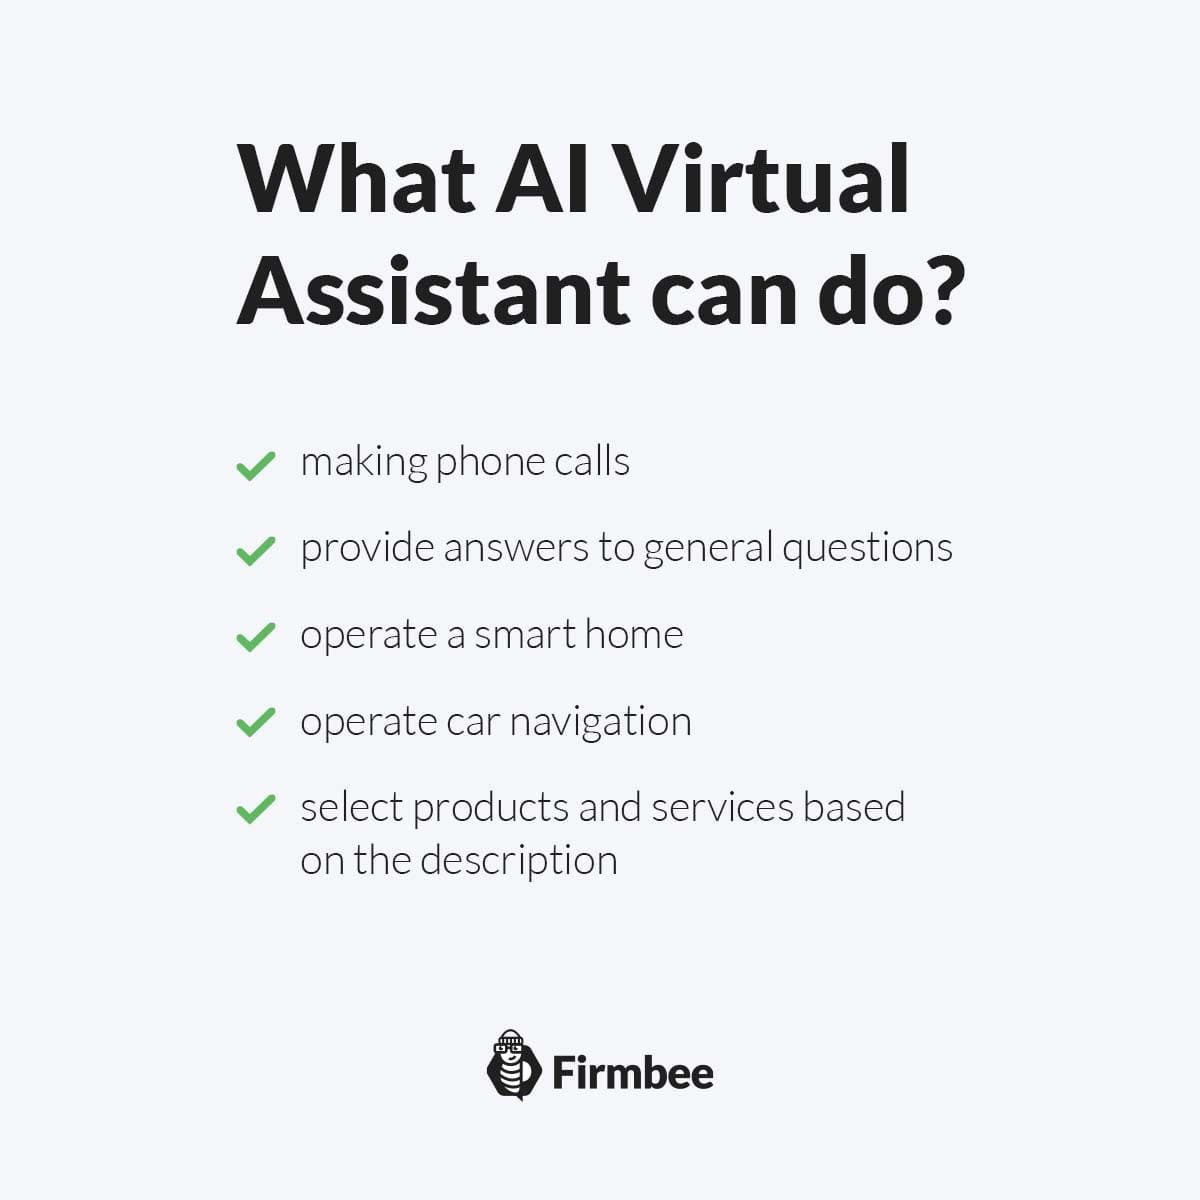 Virtual assistant or how to talk to AI